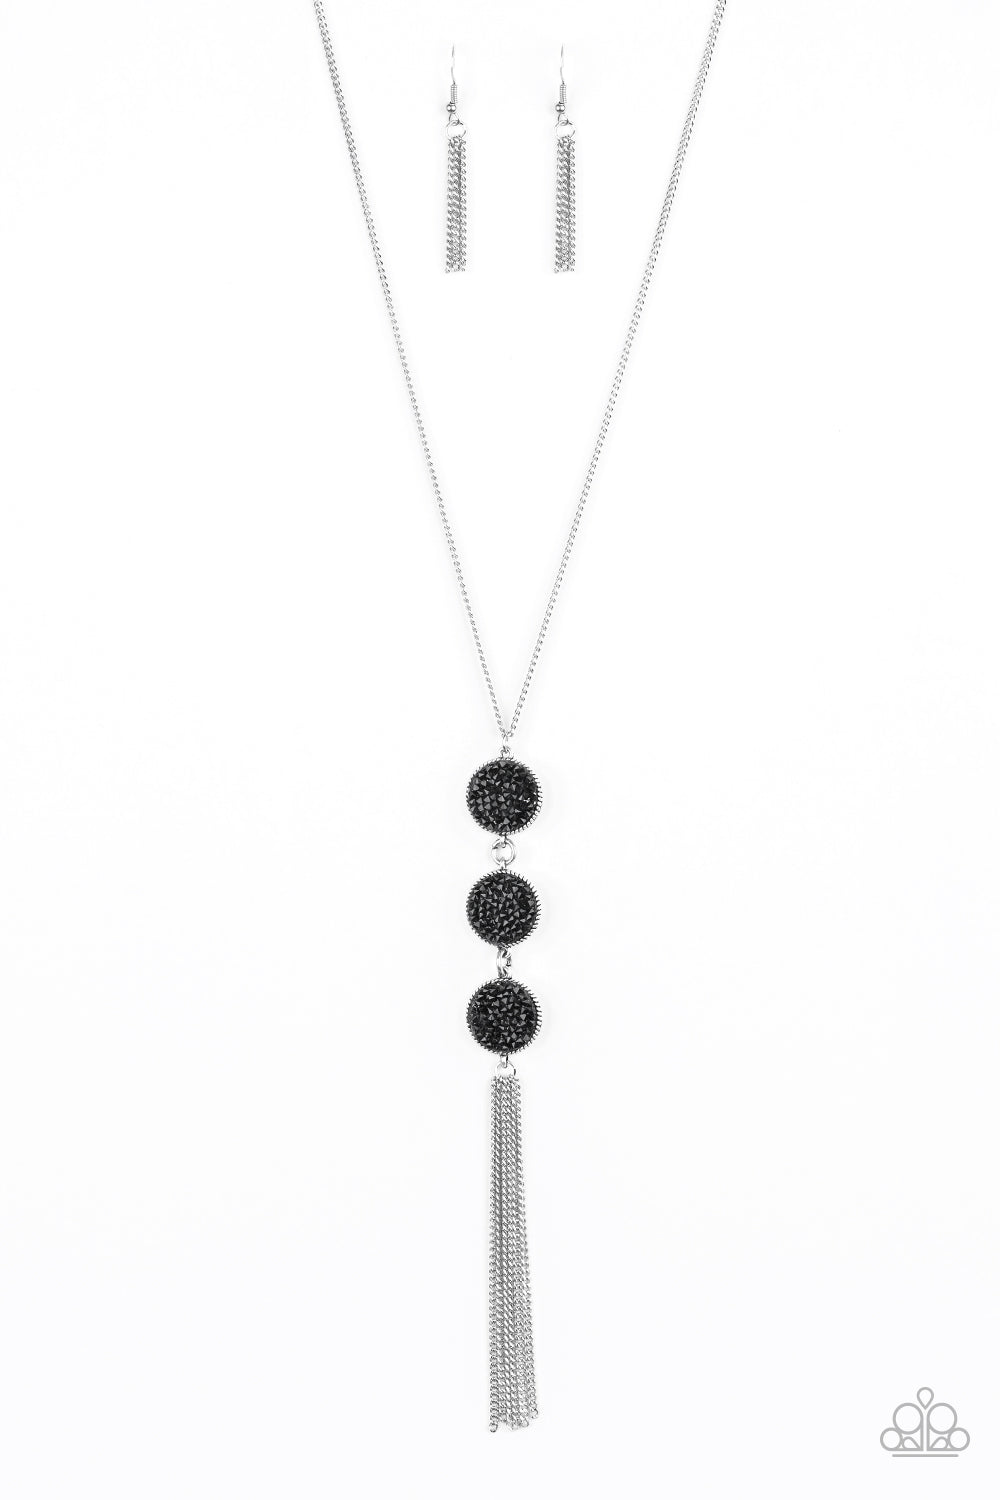 Paparazzi Accessories Triple Shimmer - Black Necklaces - Lady T Accessories